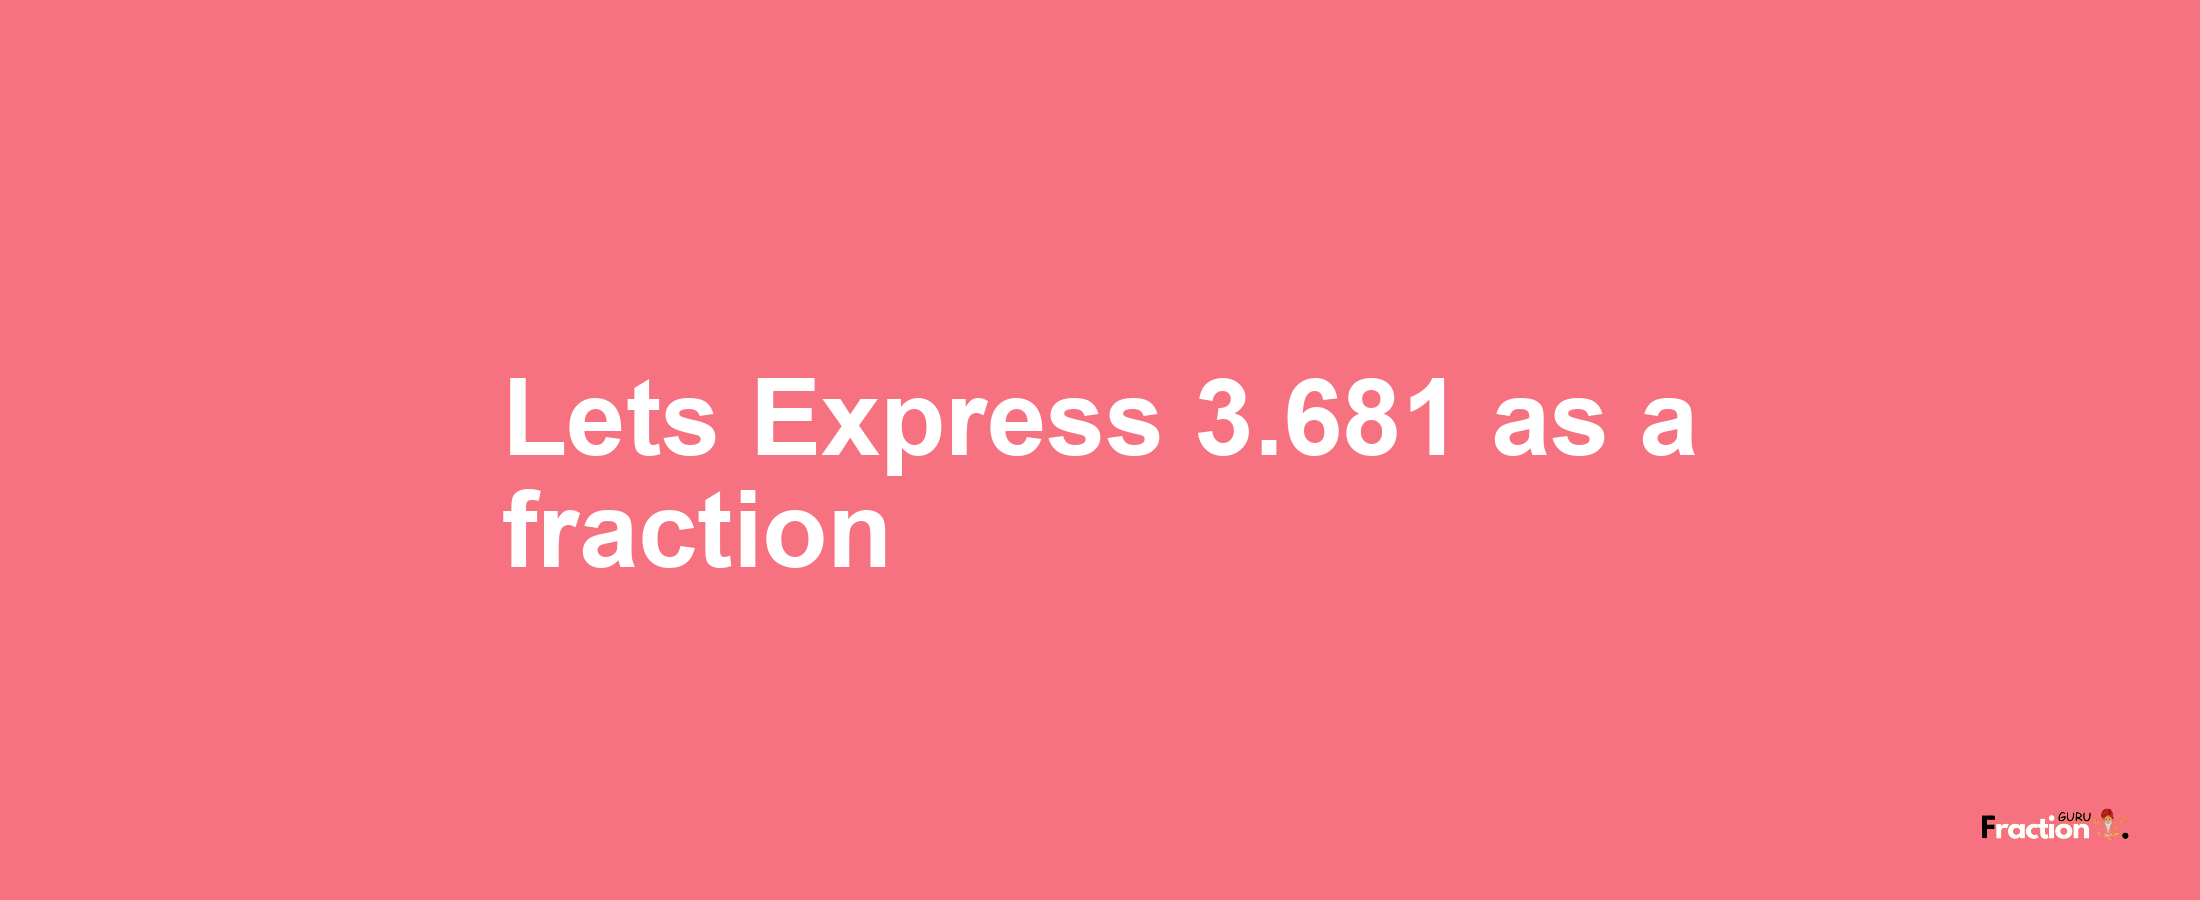 Lets Express 3.681 as afraction